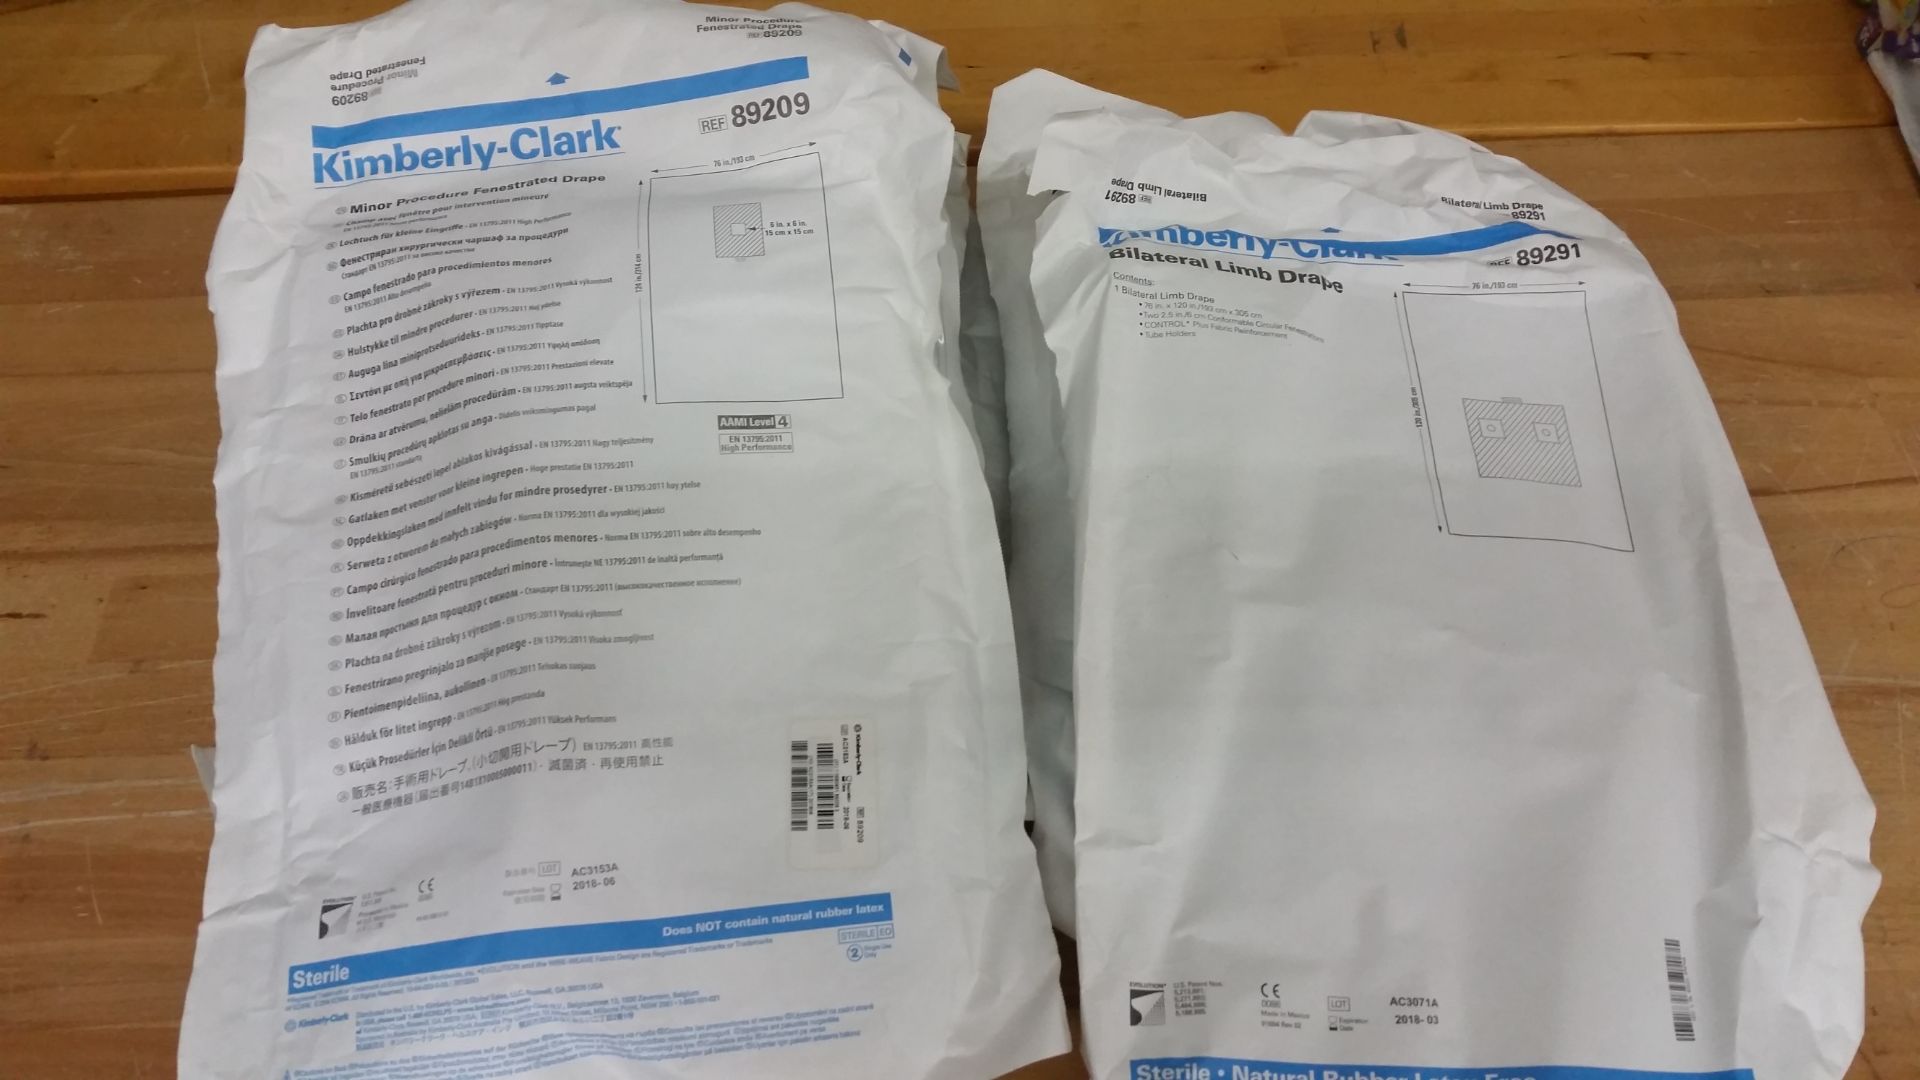 LOT OF KIMBERLY CLARK SURGICAL DRAPES